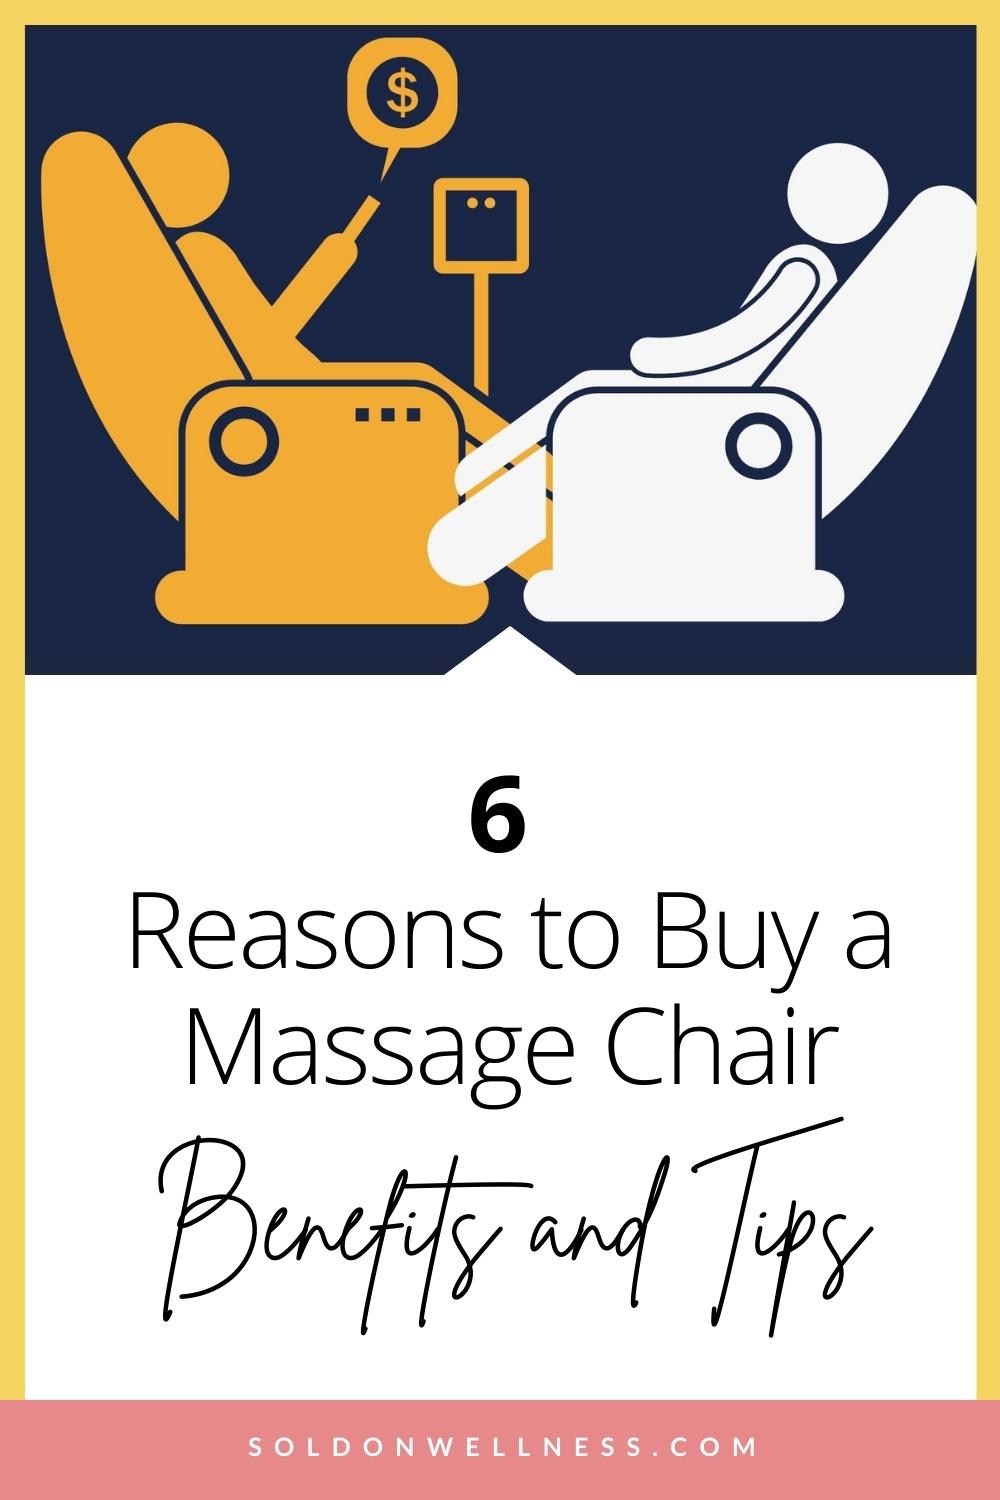 what is a massage chair